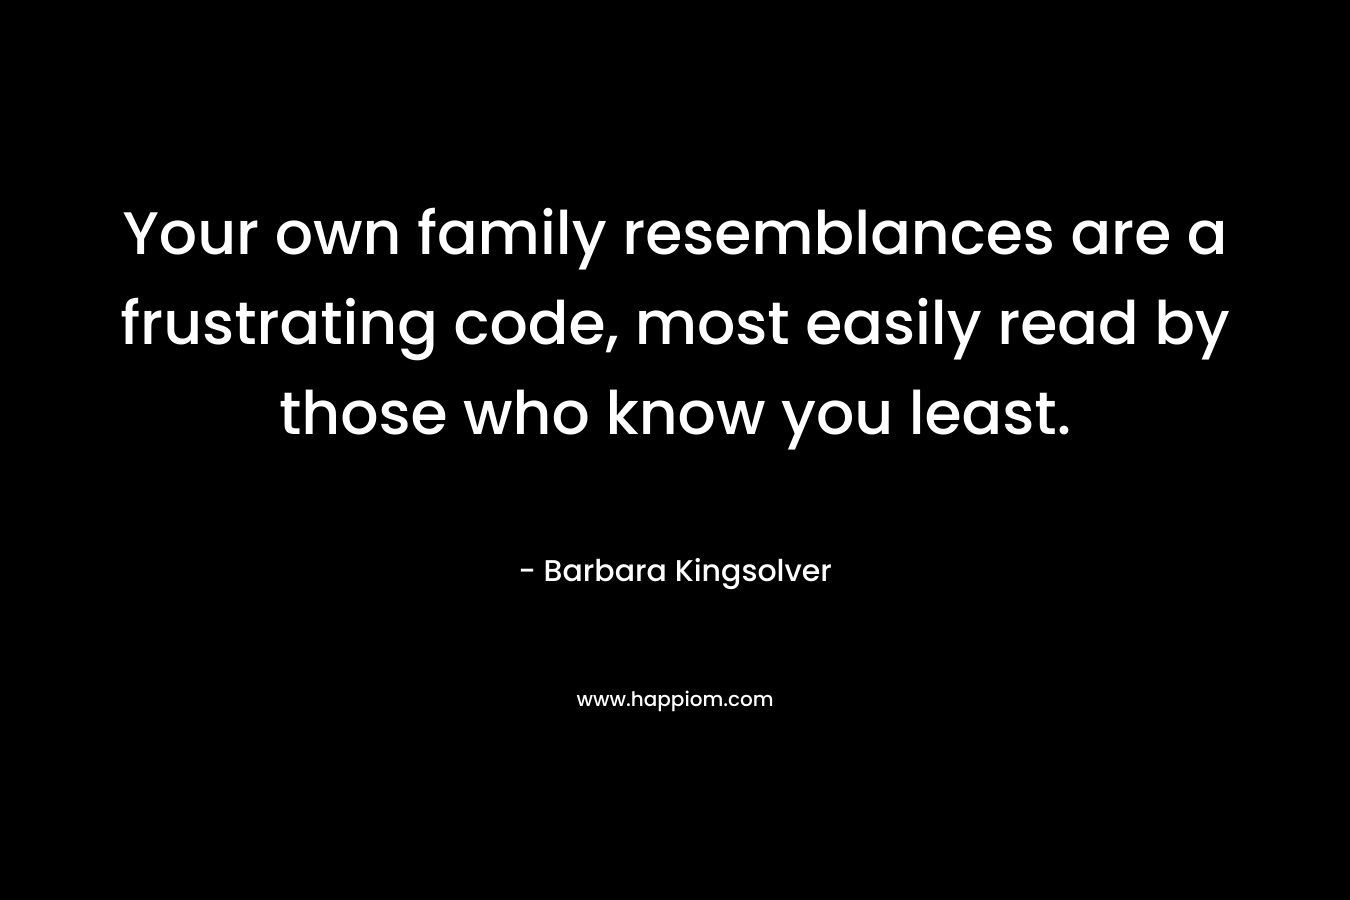 Your own family resemblances are a frustrating code, most easily read by those who know you least.